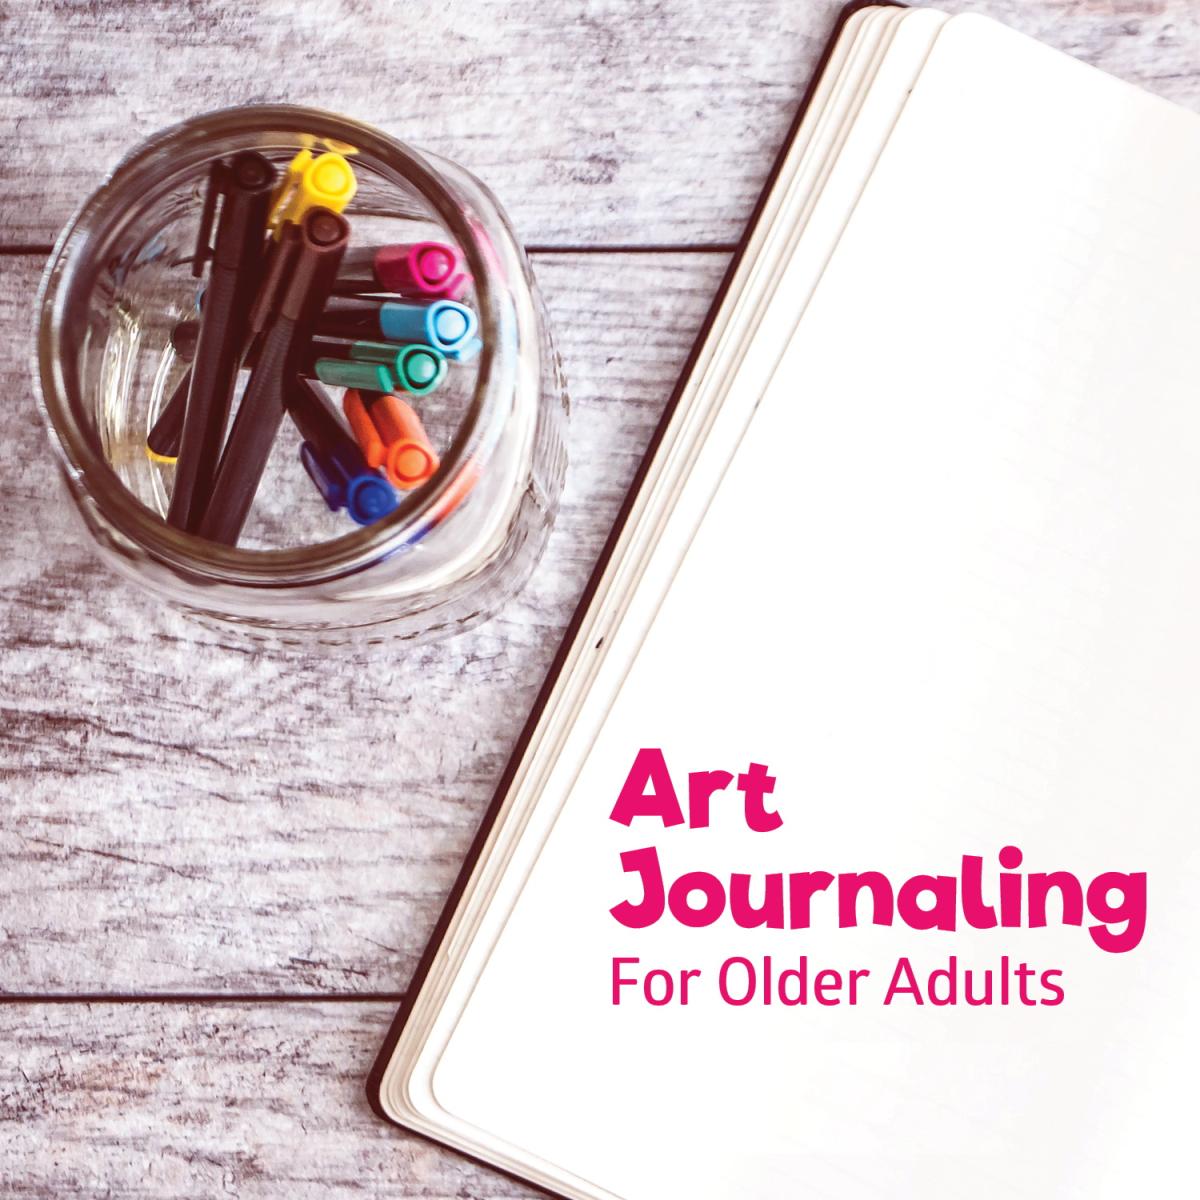 Glass jar of micron pens in various colors along with a journal open to a blank page with the text "Art Journaling for Older Adults" at the bottom